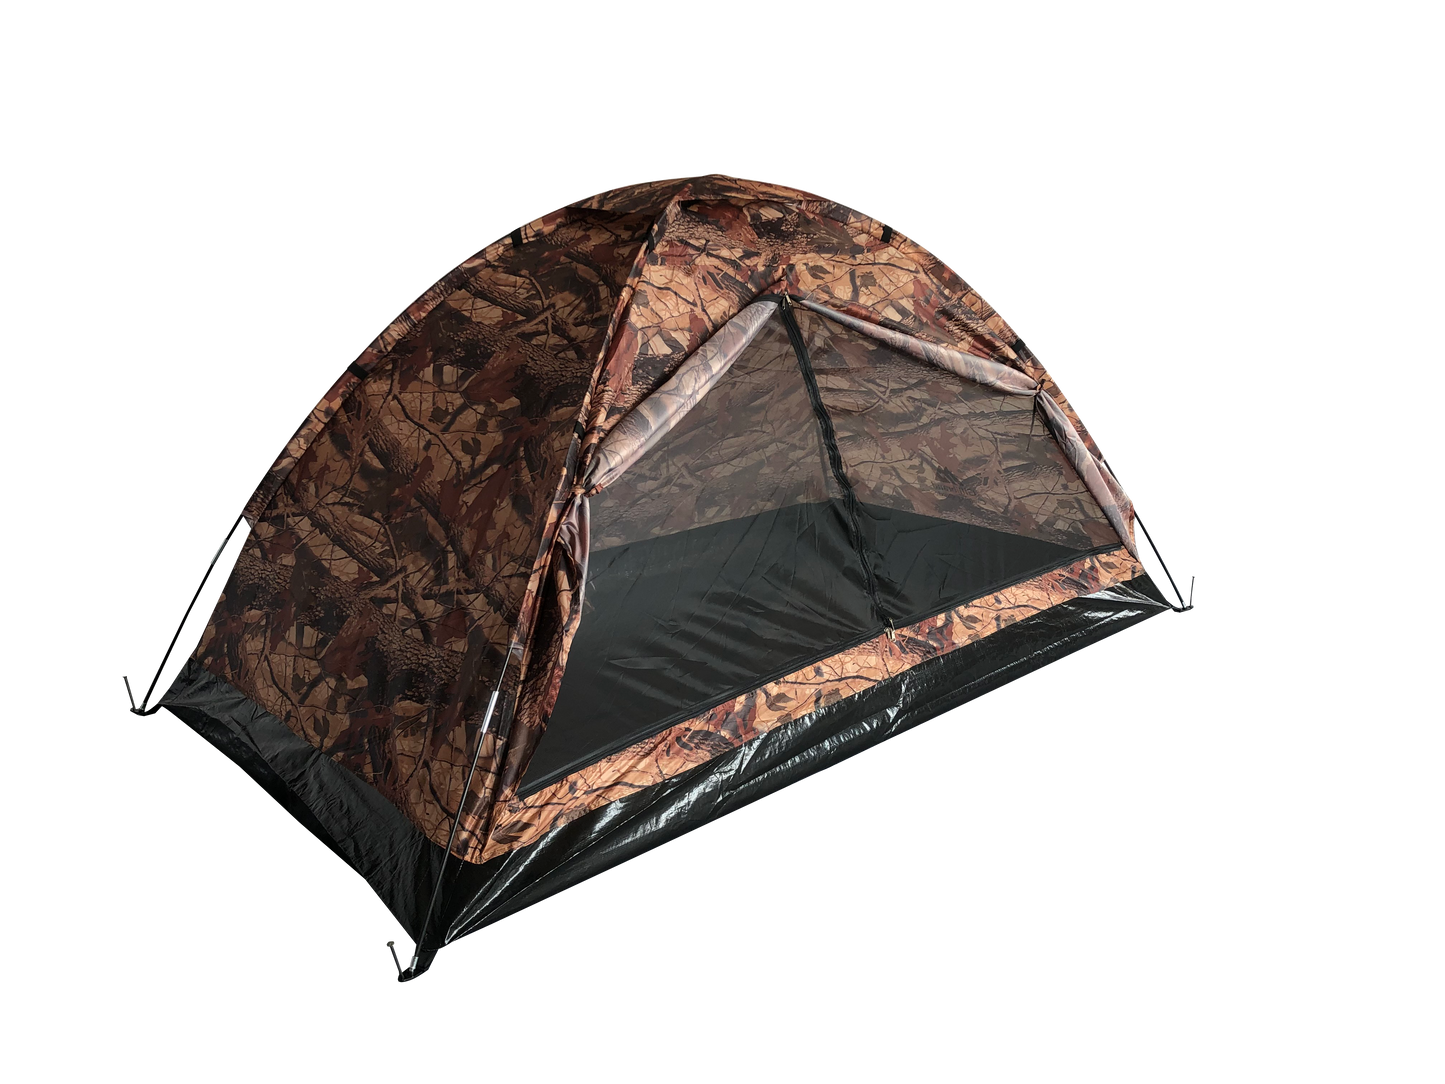 Chotto Outdoor - Gibson Camping Tent - Leaf camouflage, desert color